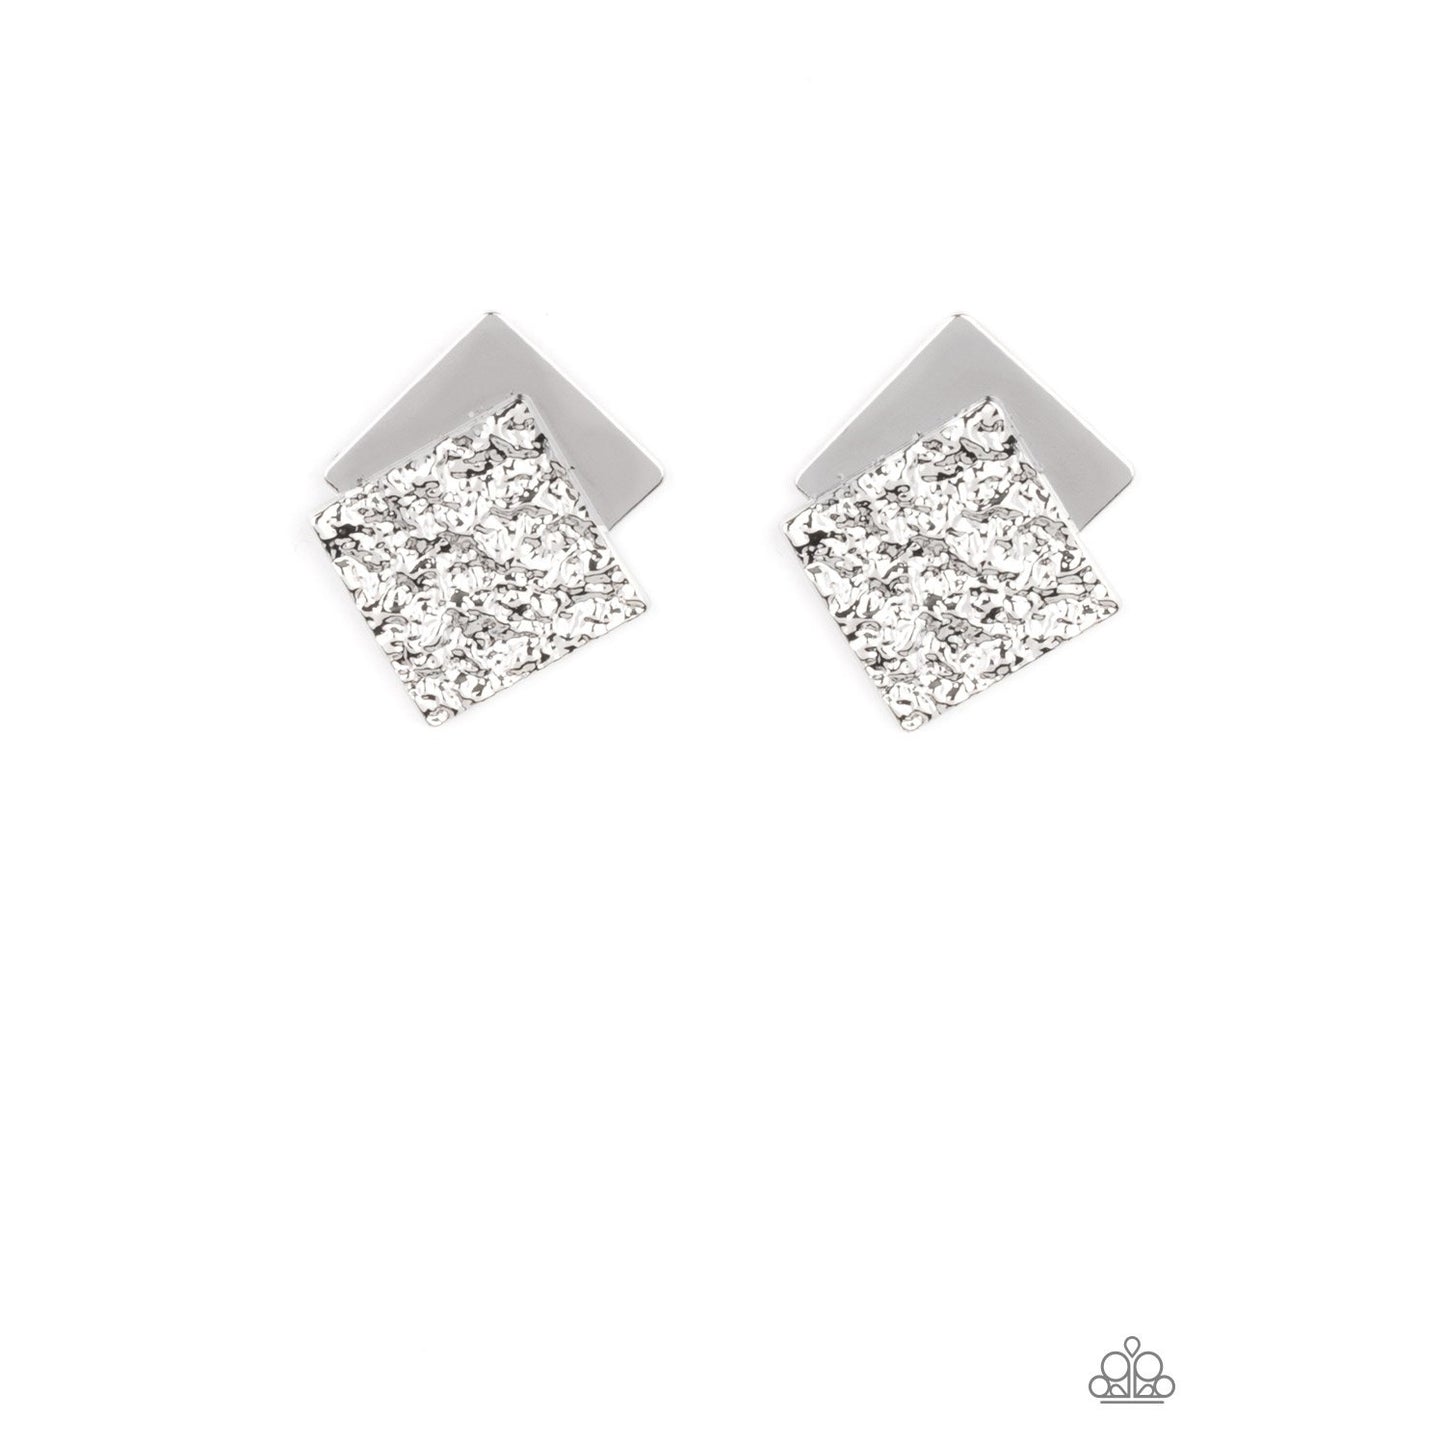 Square With Style - Silver Earrings - Paparazzi Accessories - GlaMarous Titi Jewels